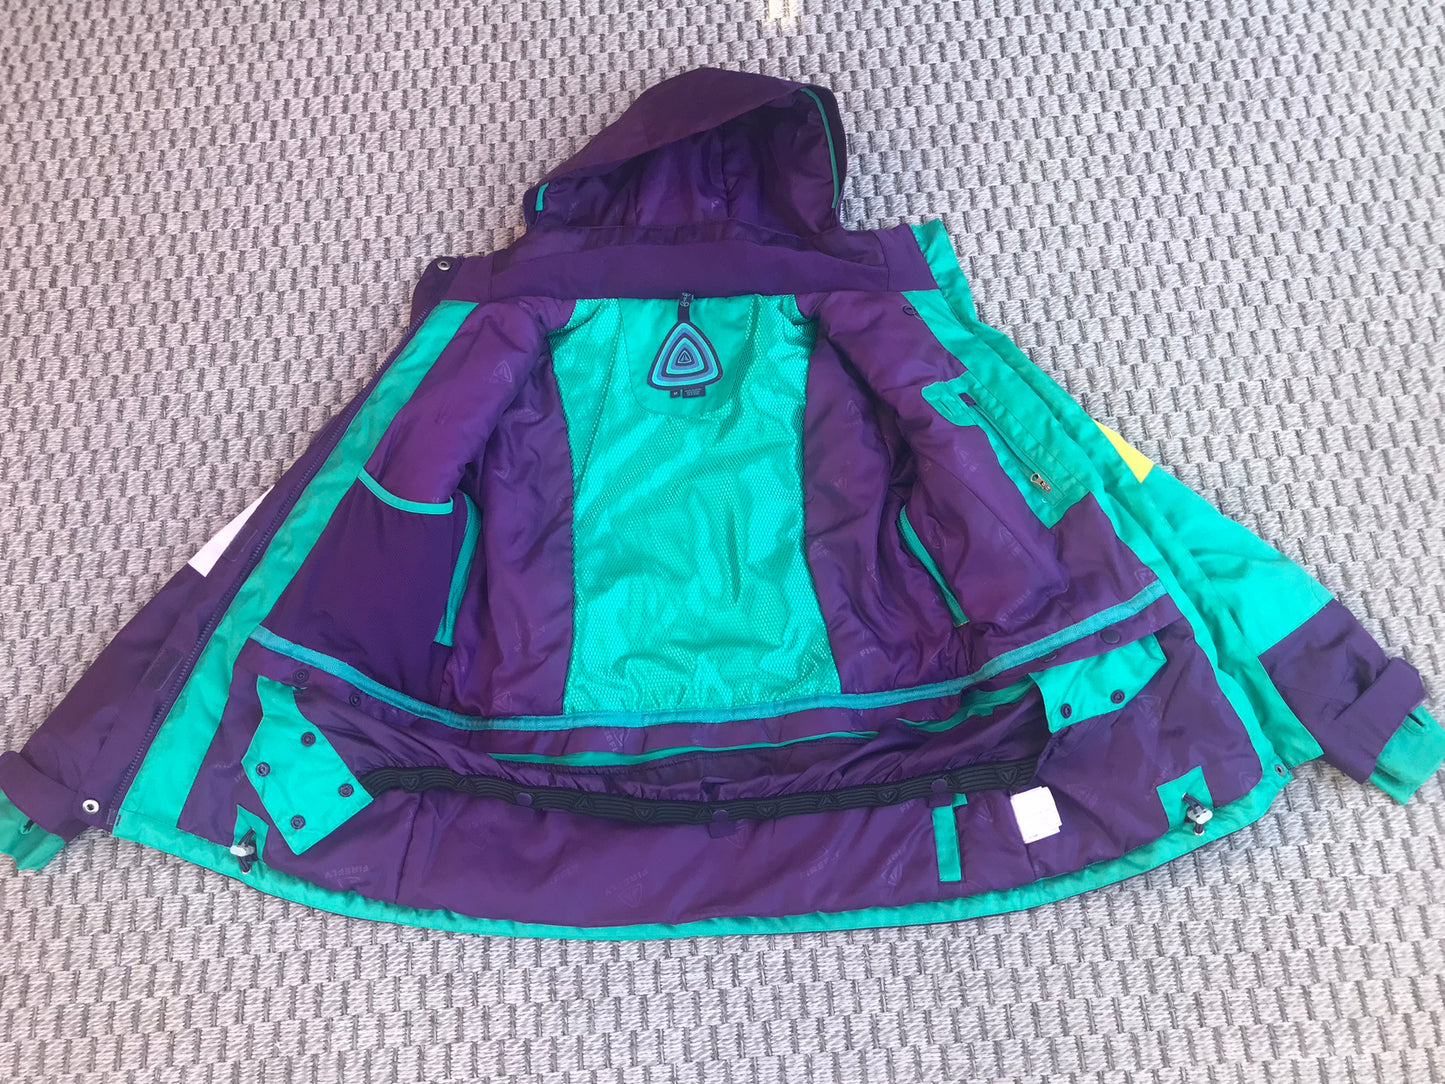 Winter Coat Ladies Size Medium Firefly Purple Teal White With Snow Belt Like New